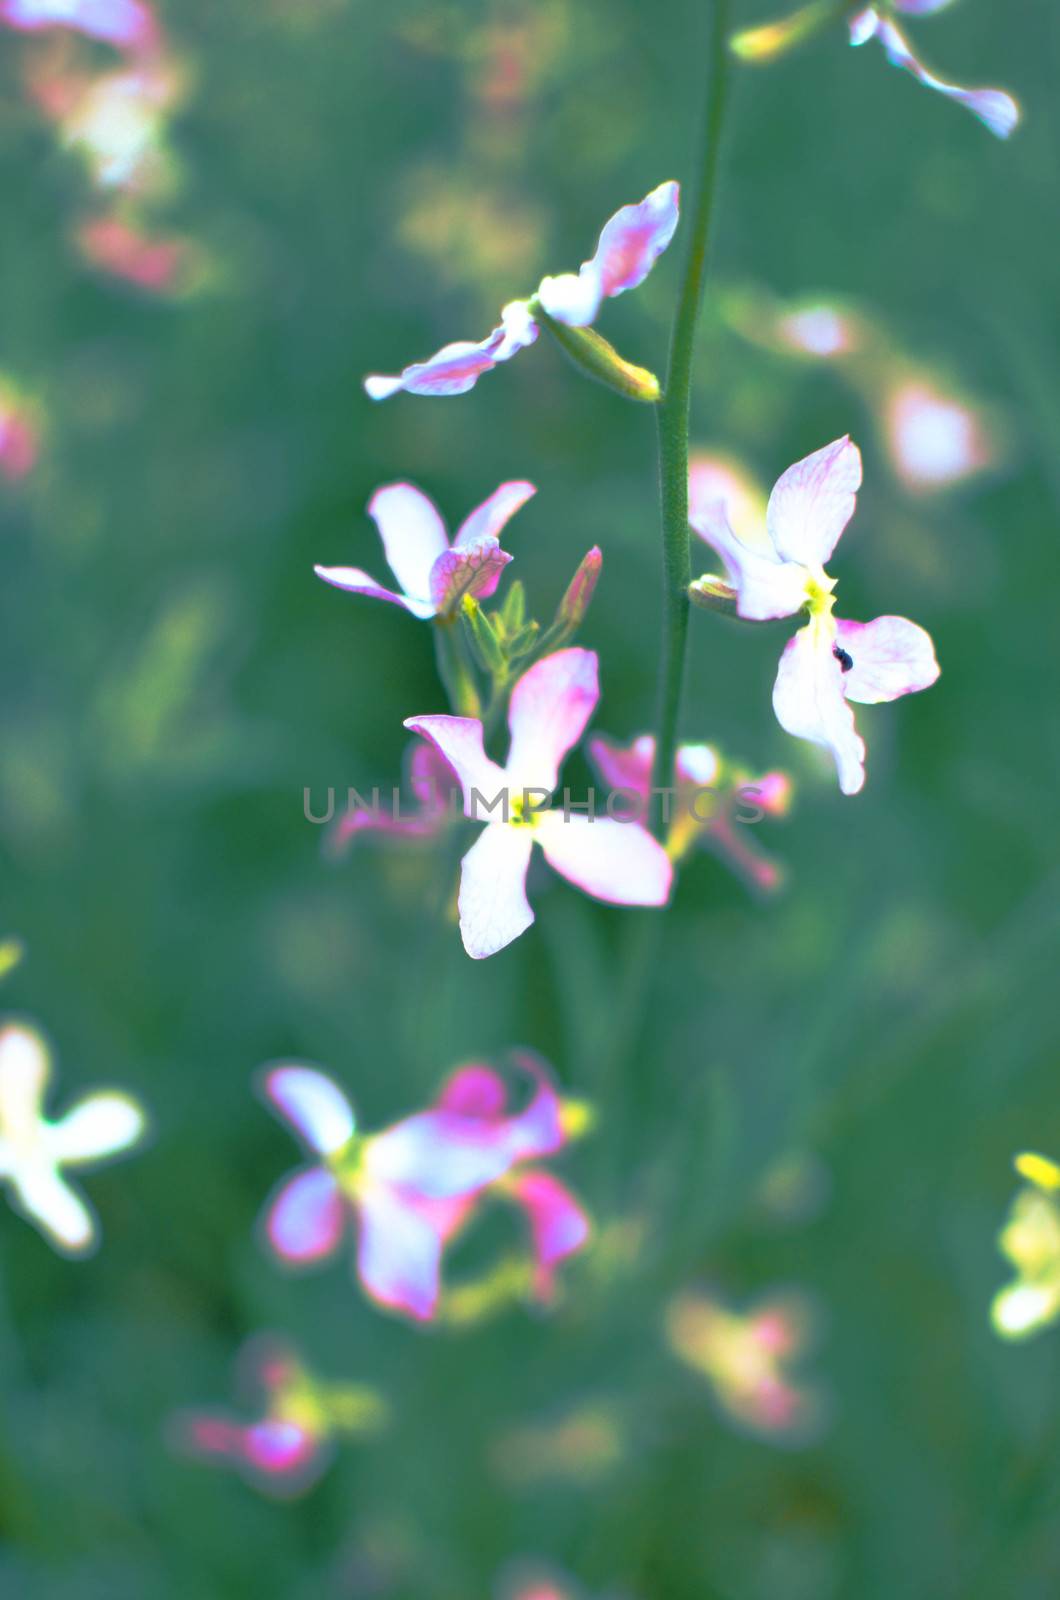 Night flowers violet spring gentle background by kimbo-bo